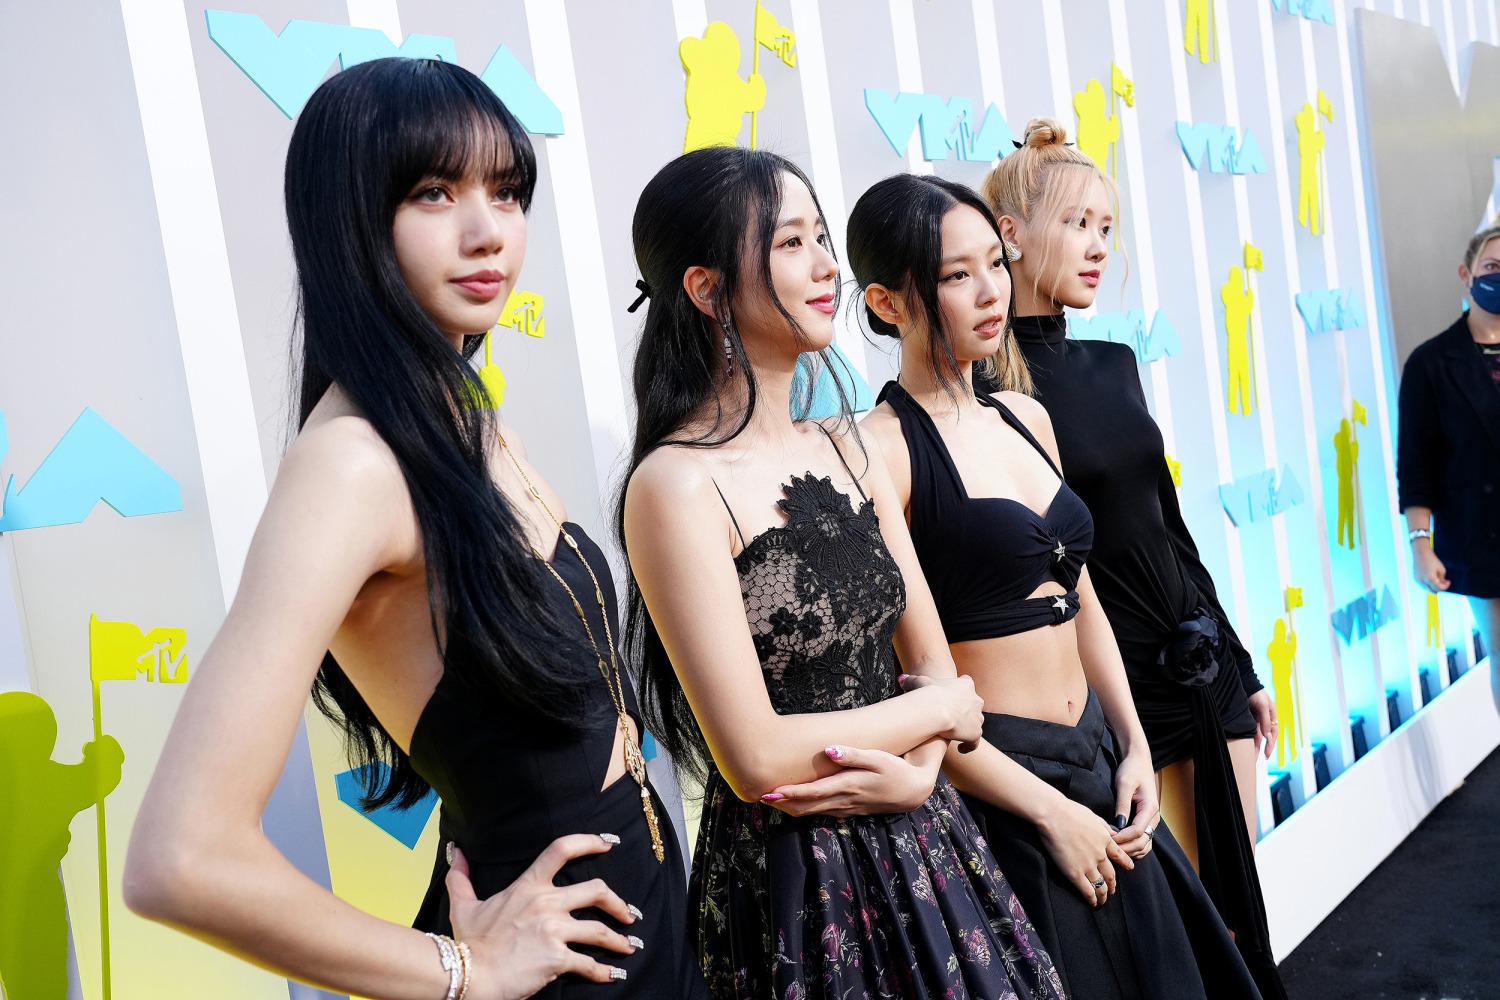 BLACKPINK made their VMAs red carpet debut in matching shades, black pink 